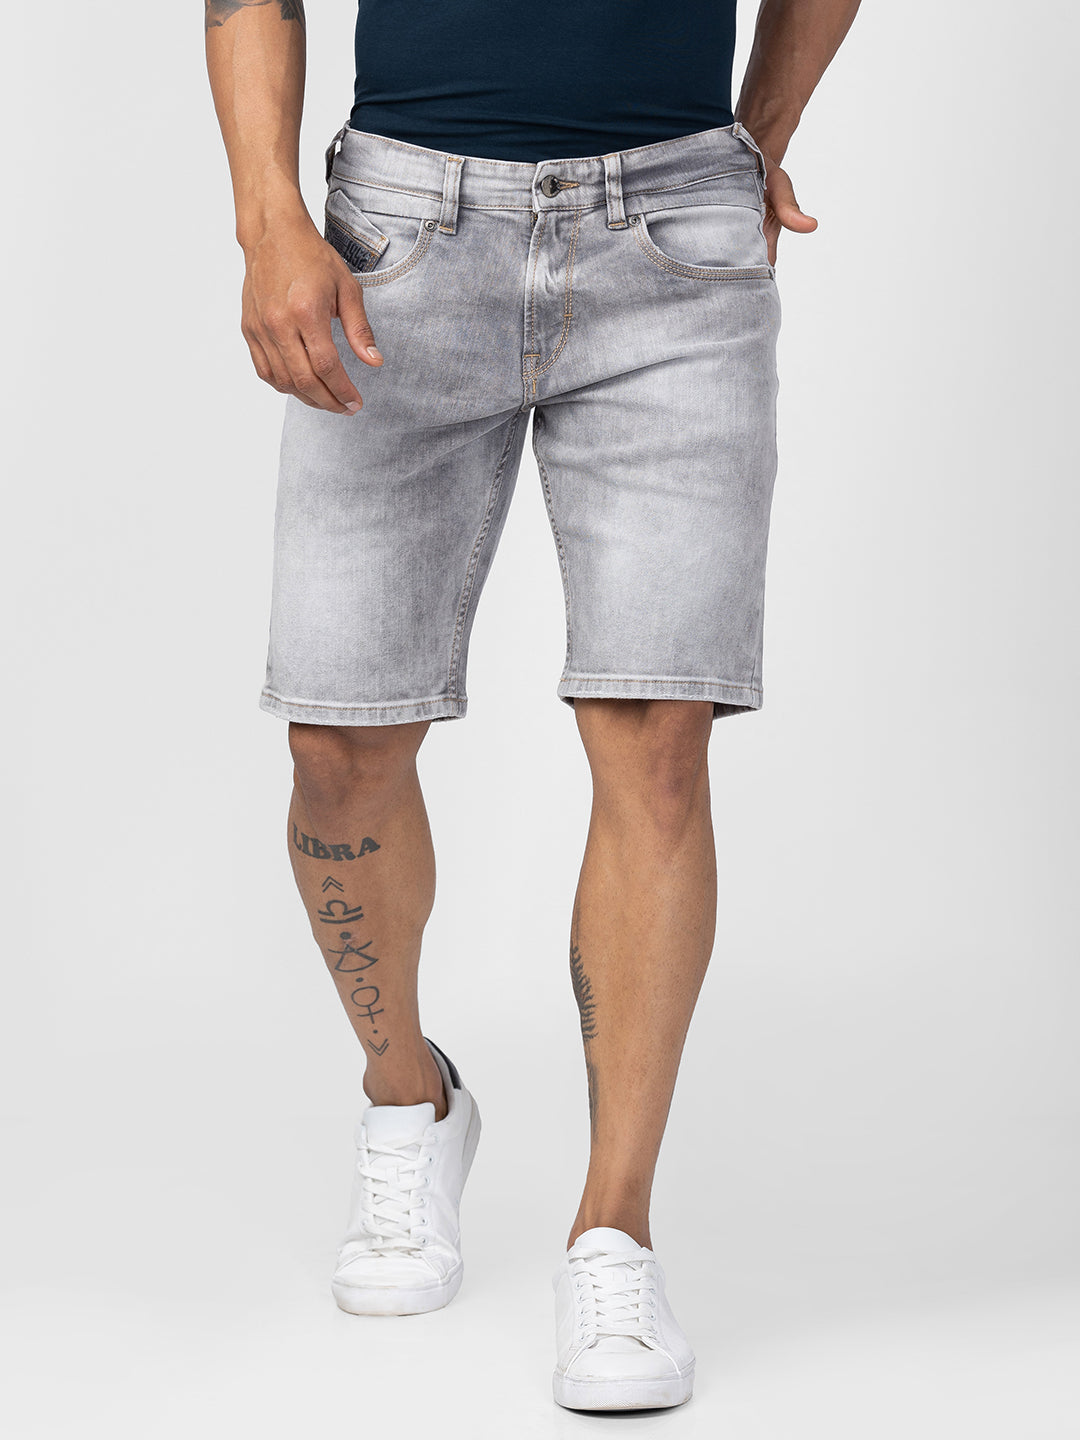 Men Painted Denim Shorts Jeans Summer Pocket Big Size Casual Distressed  Holes Slim Fit Mens Short Pants Trousers DY1125 From Xichat, $31.67 |  DHgate.Com